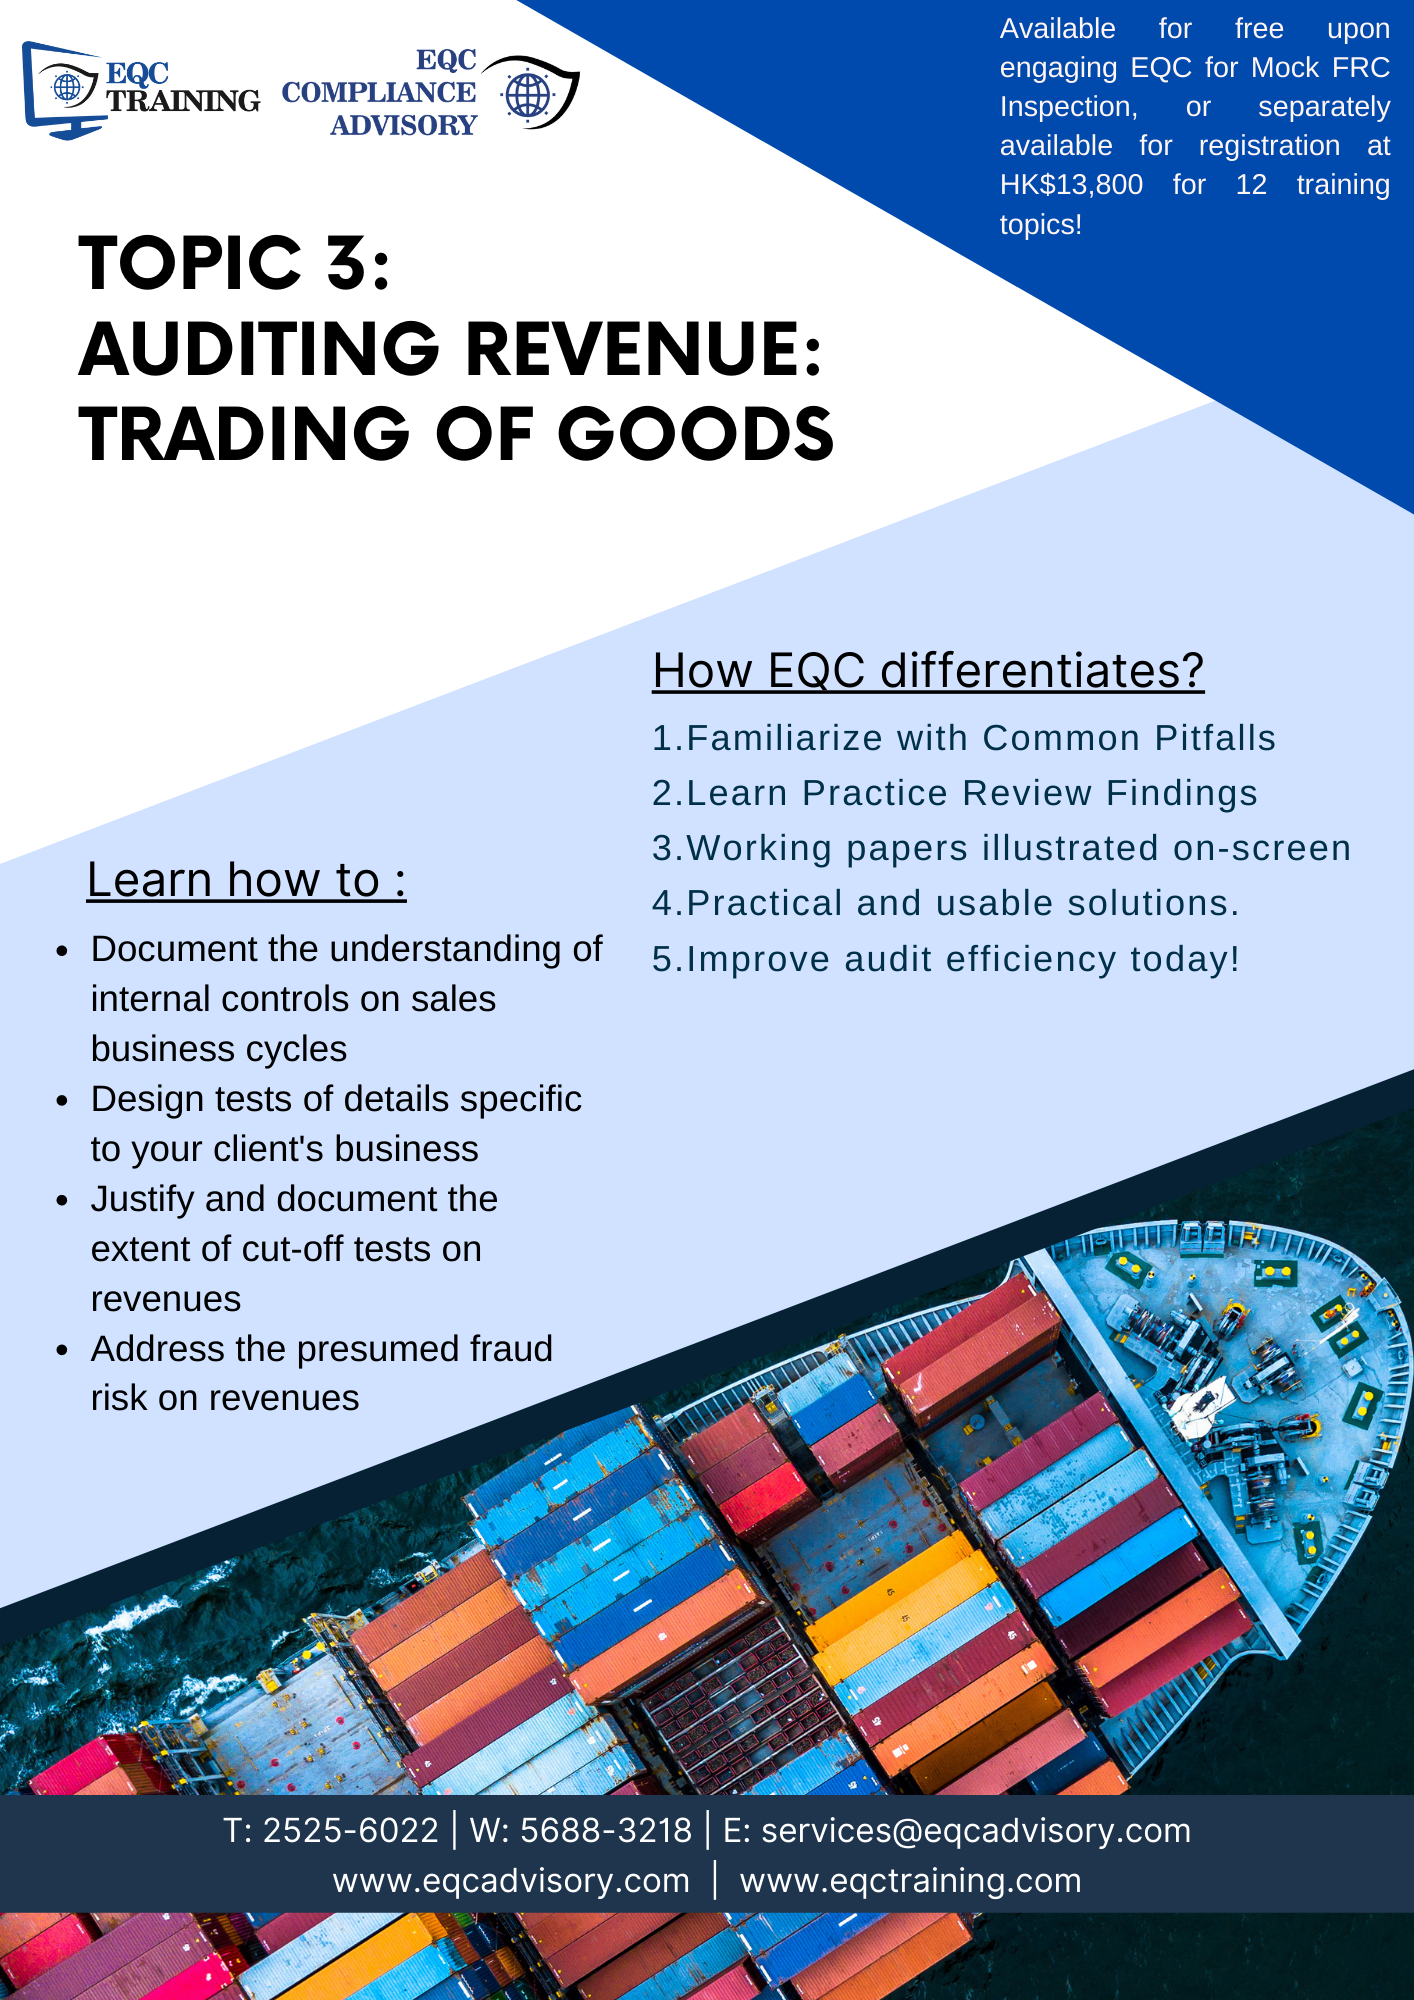 Topic 03 - Auditing Revenue: Trading of Goods